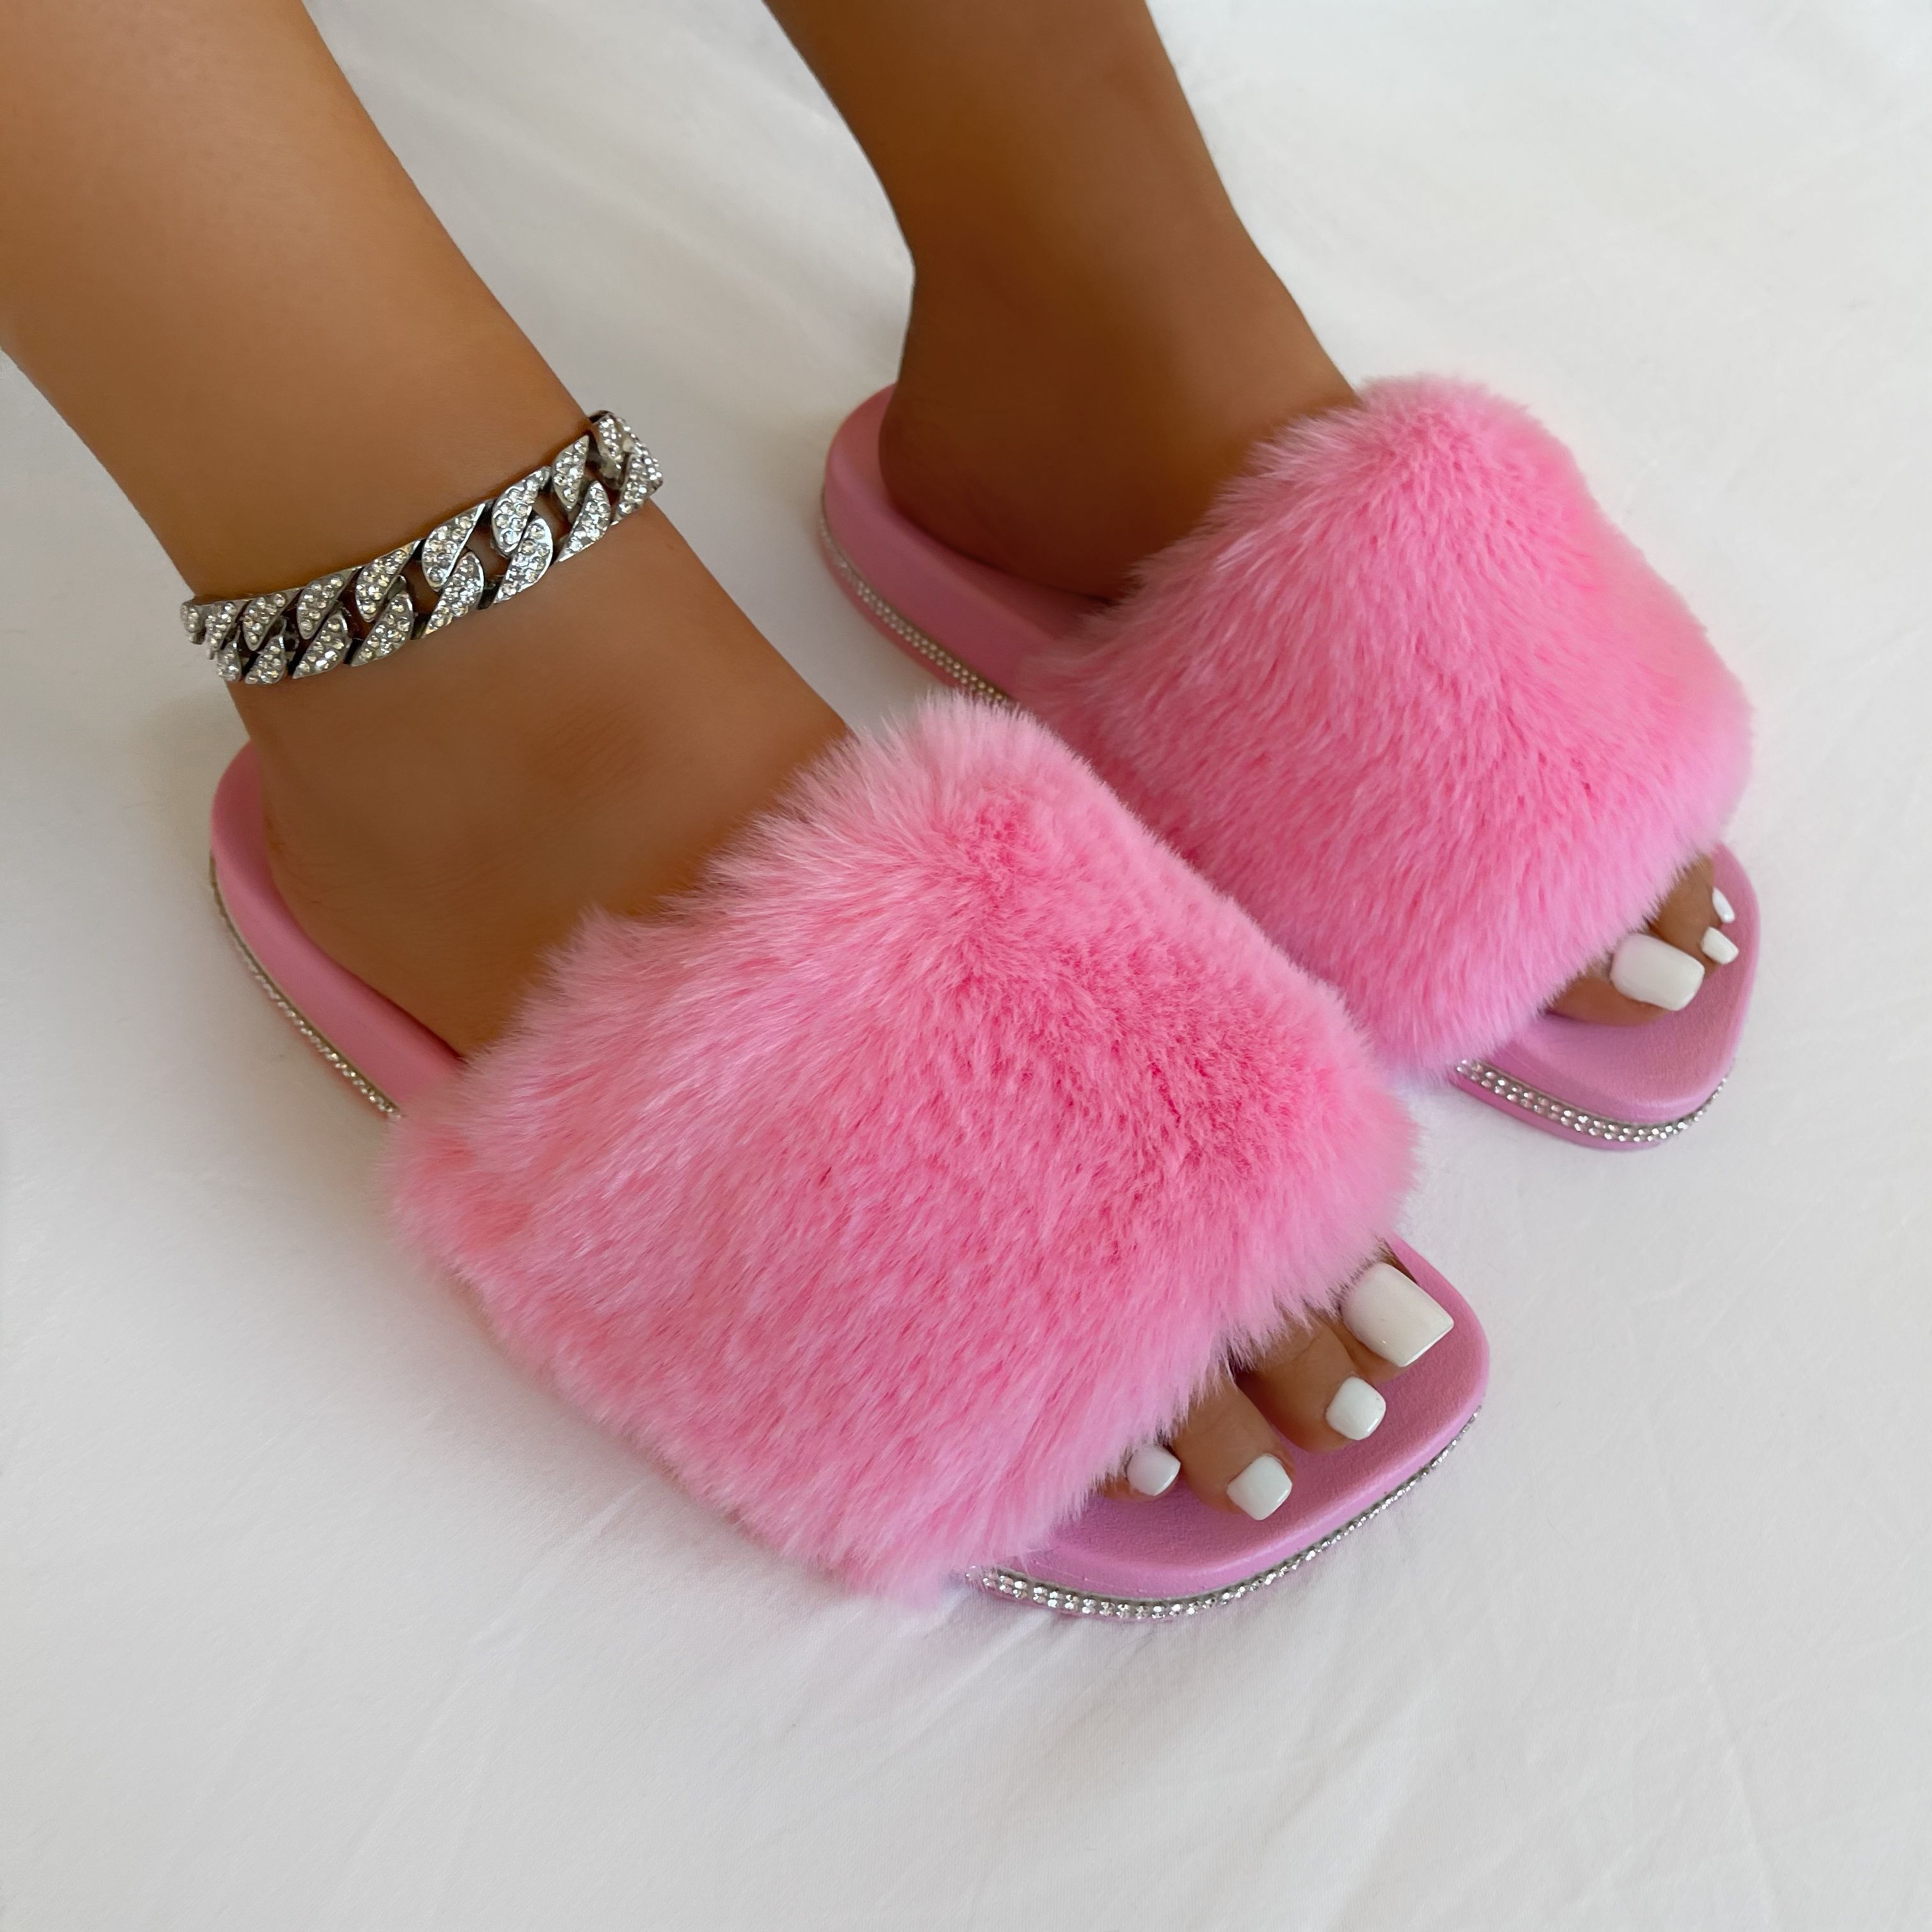 Candyfloss Candy Pink Fluffy Faux Fur Slippers